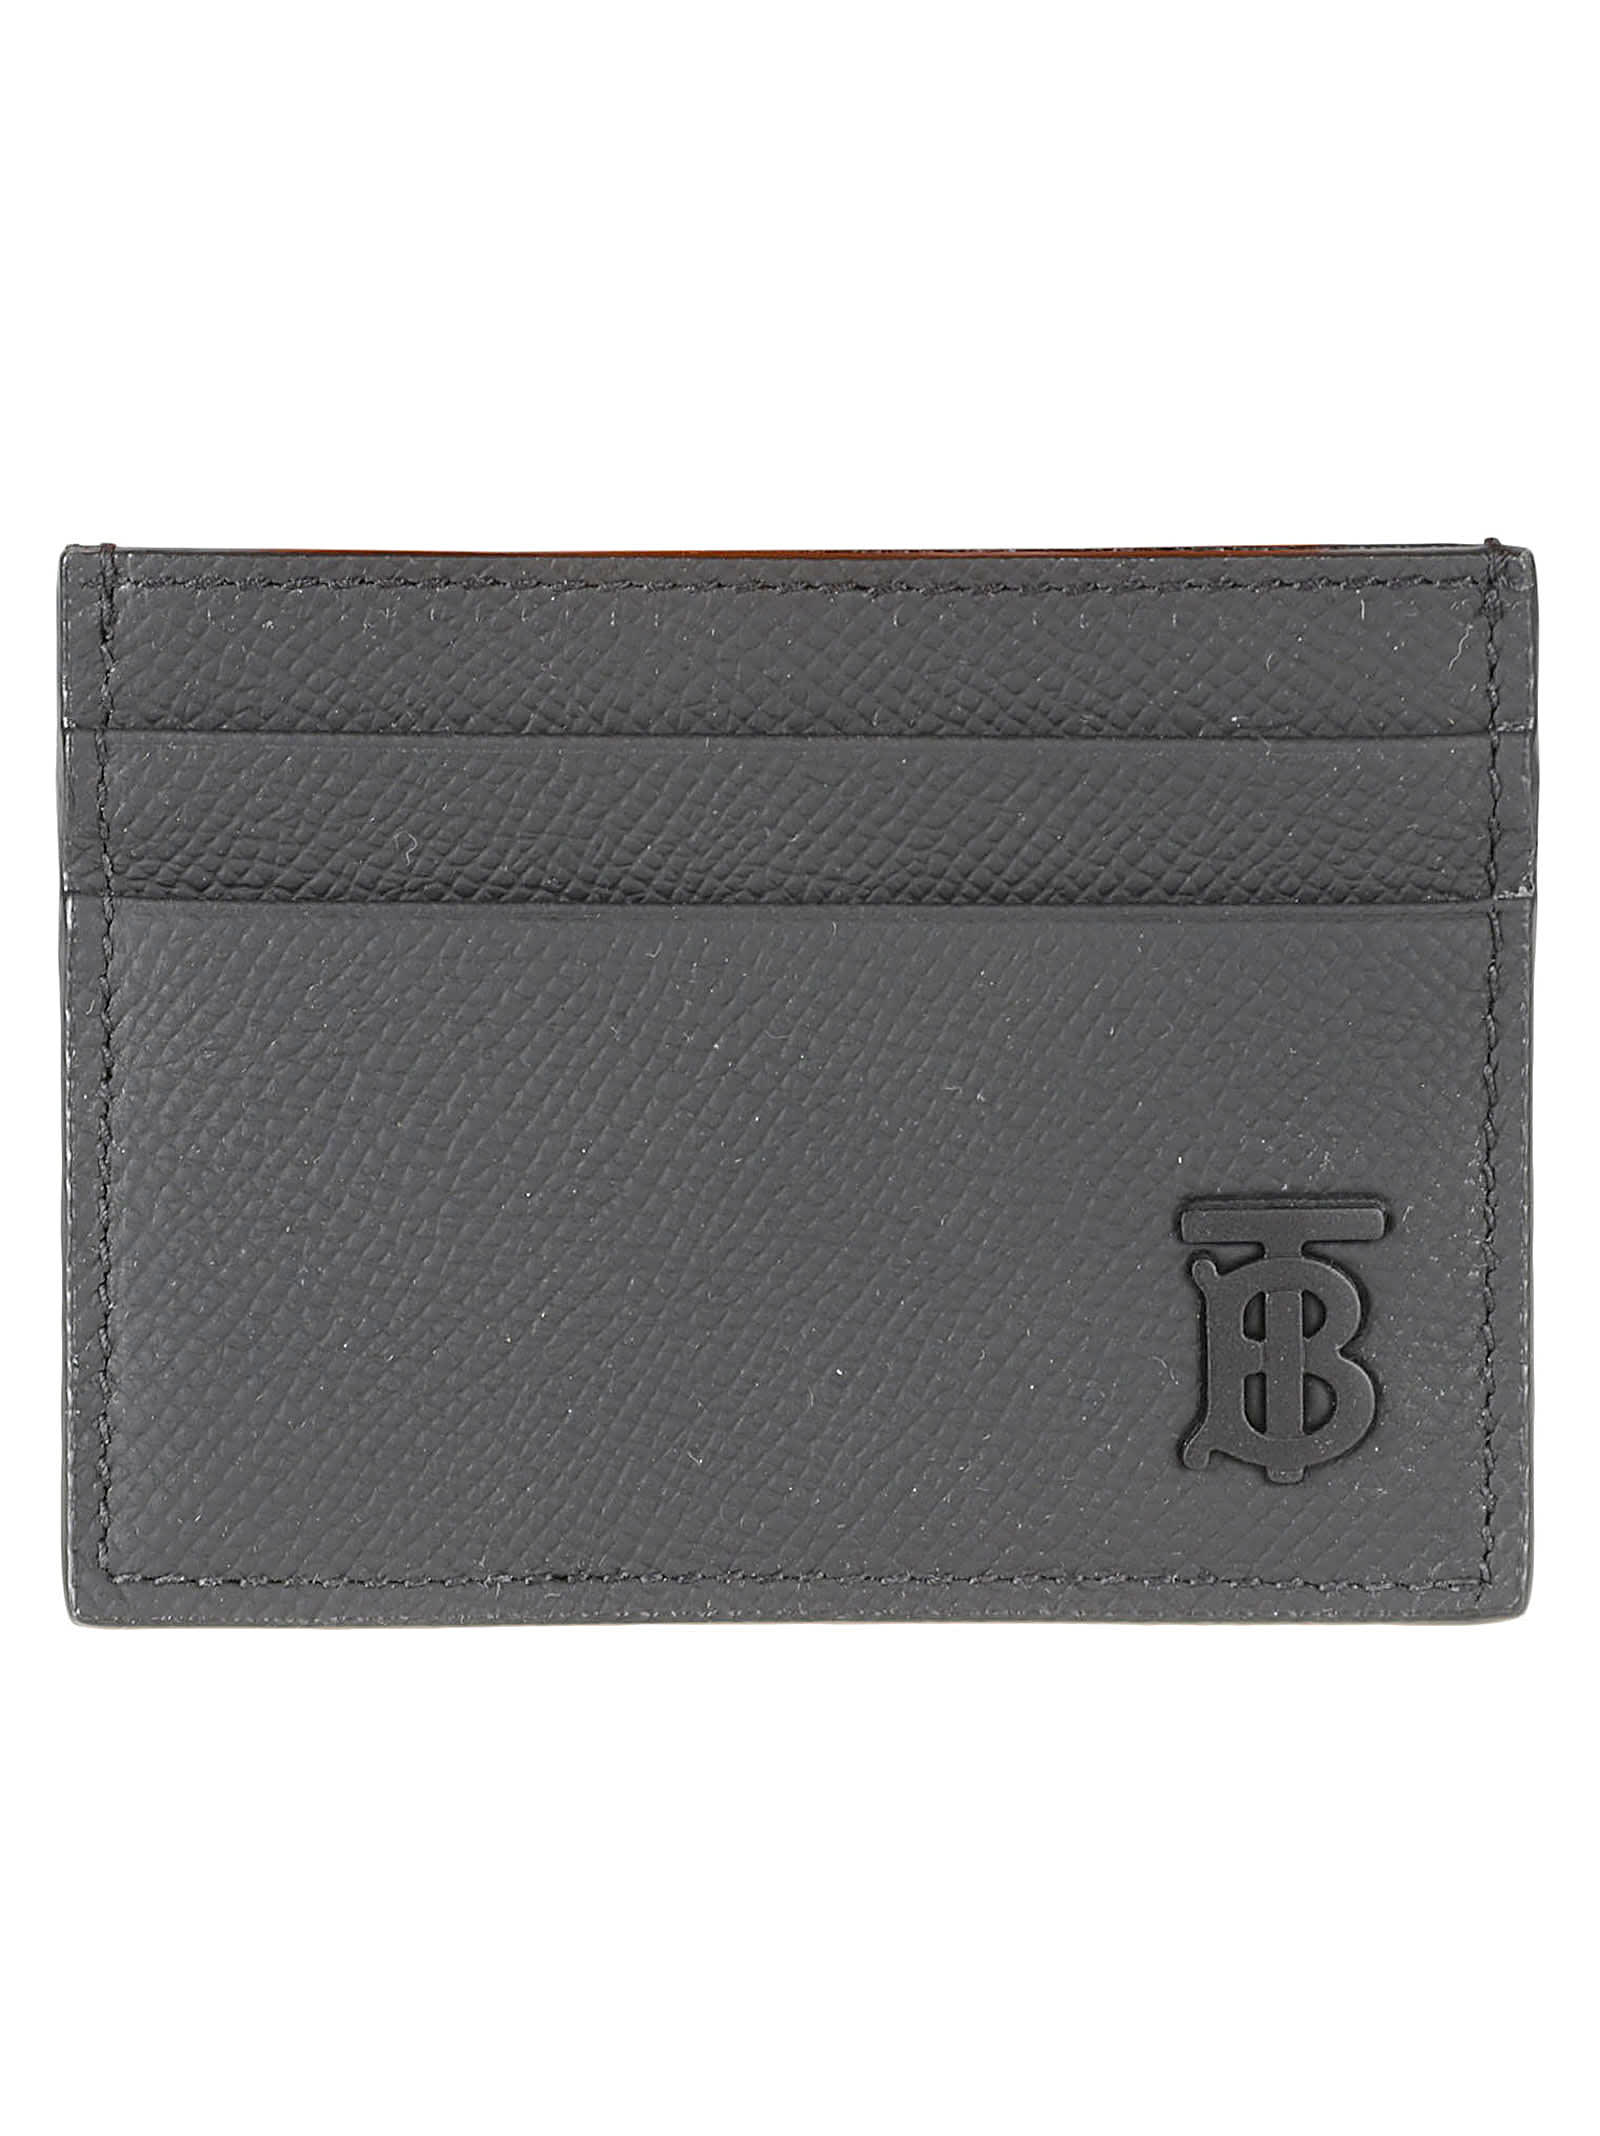 Burberry Tb Embossed Card Holder In Gray